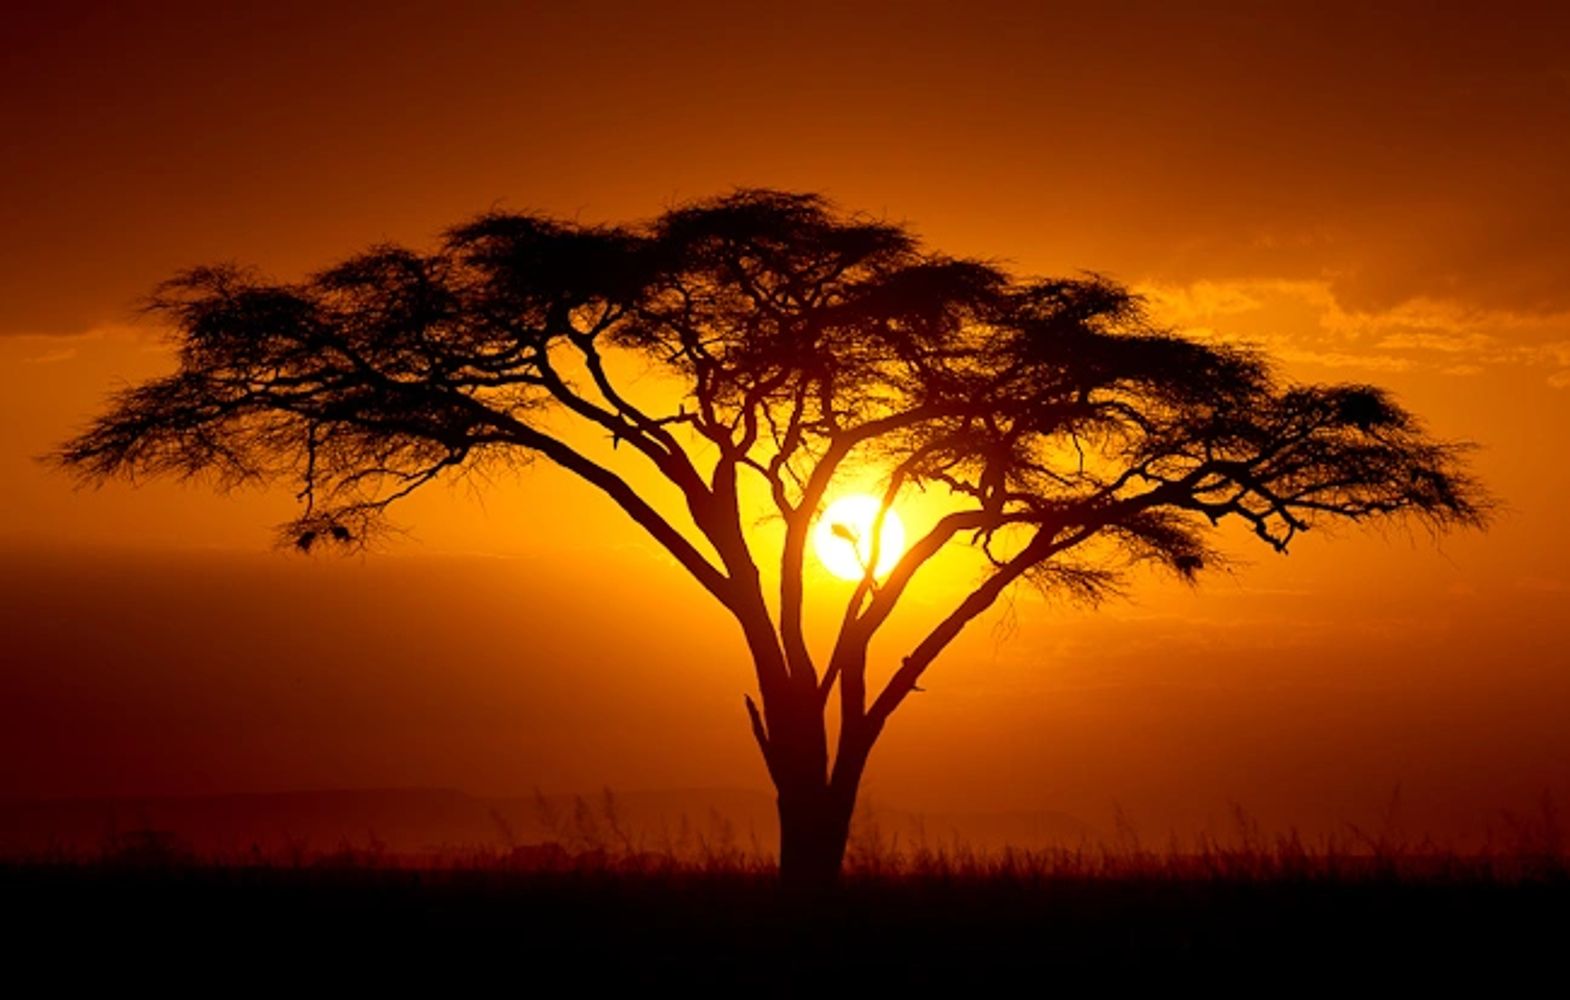 The sun setting behind a an Acacia tree on the scorched earth of the African plain.